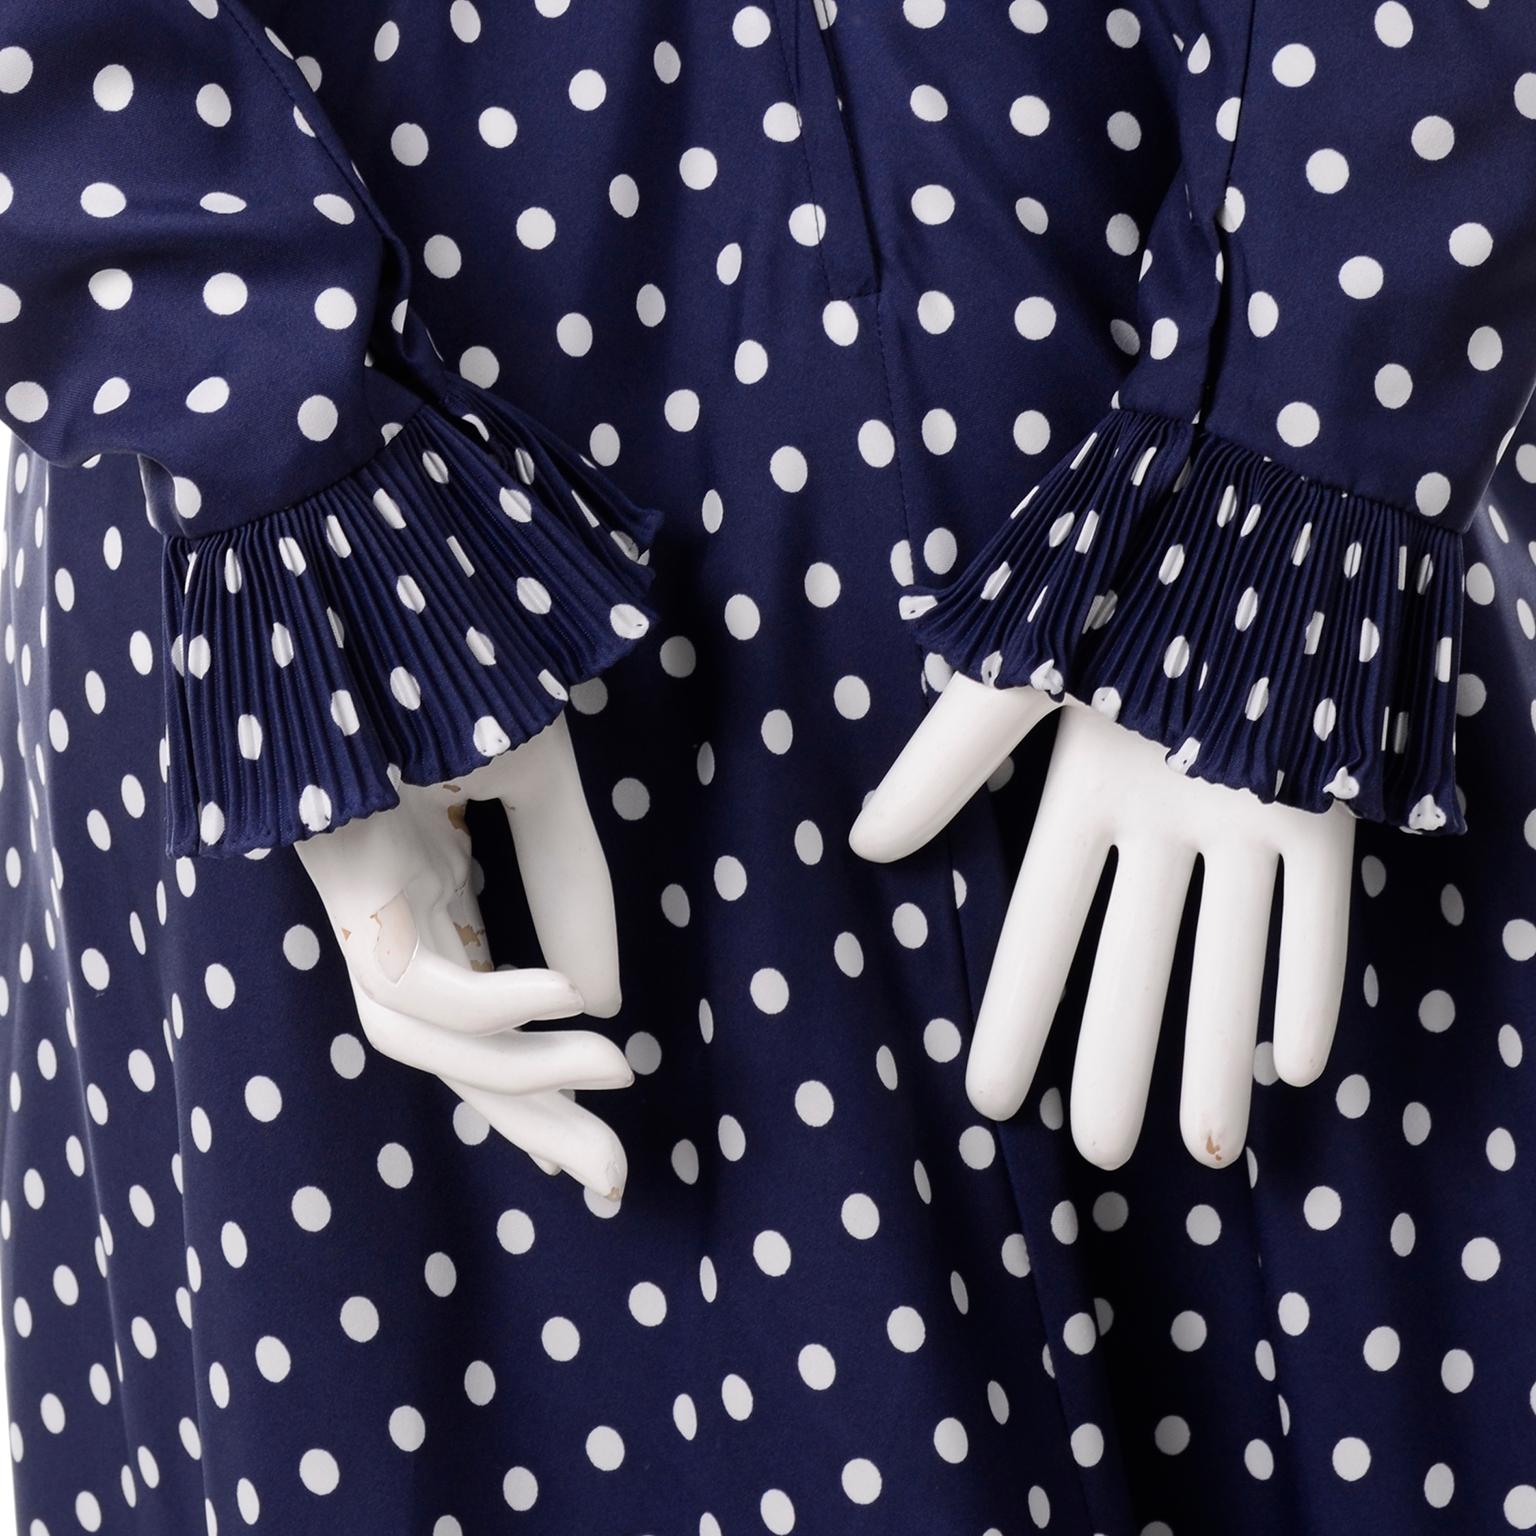 Women's 1970s Victor Costa Navy Blue & White Polka Dot Vintage Dress With Ruffles For Sale